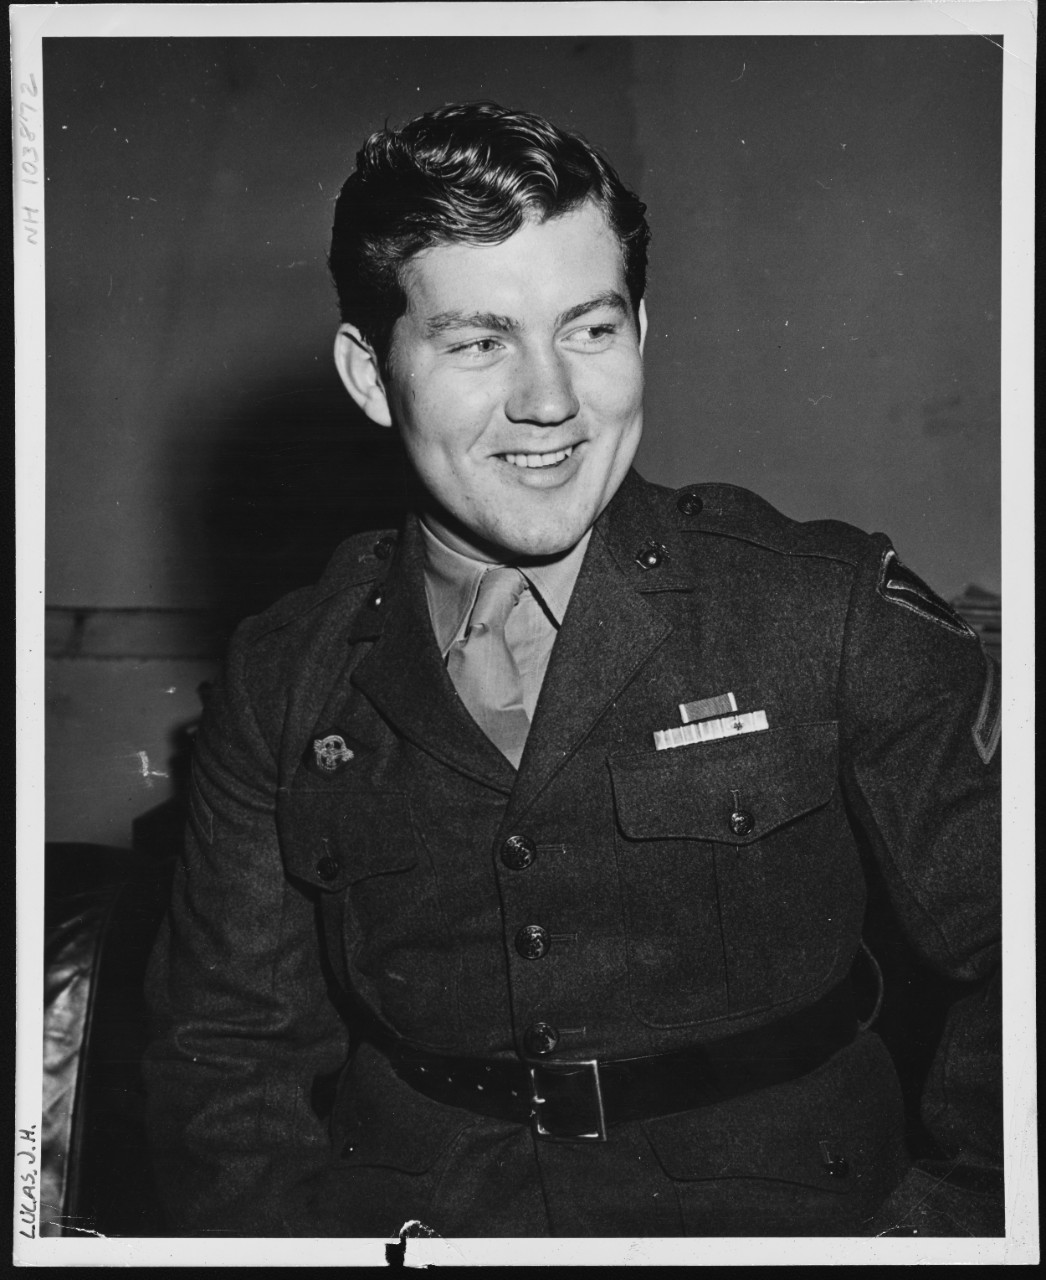 Photo #: NH 103872  Private First Class Jacklyn H. Lucas, USMCR